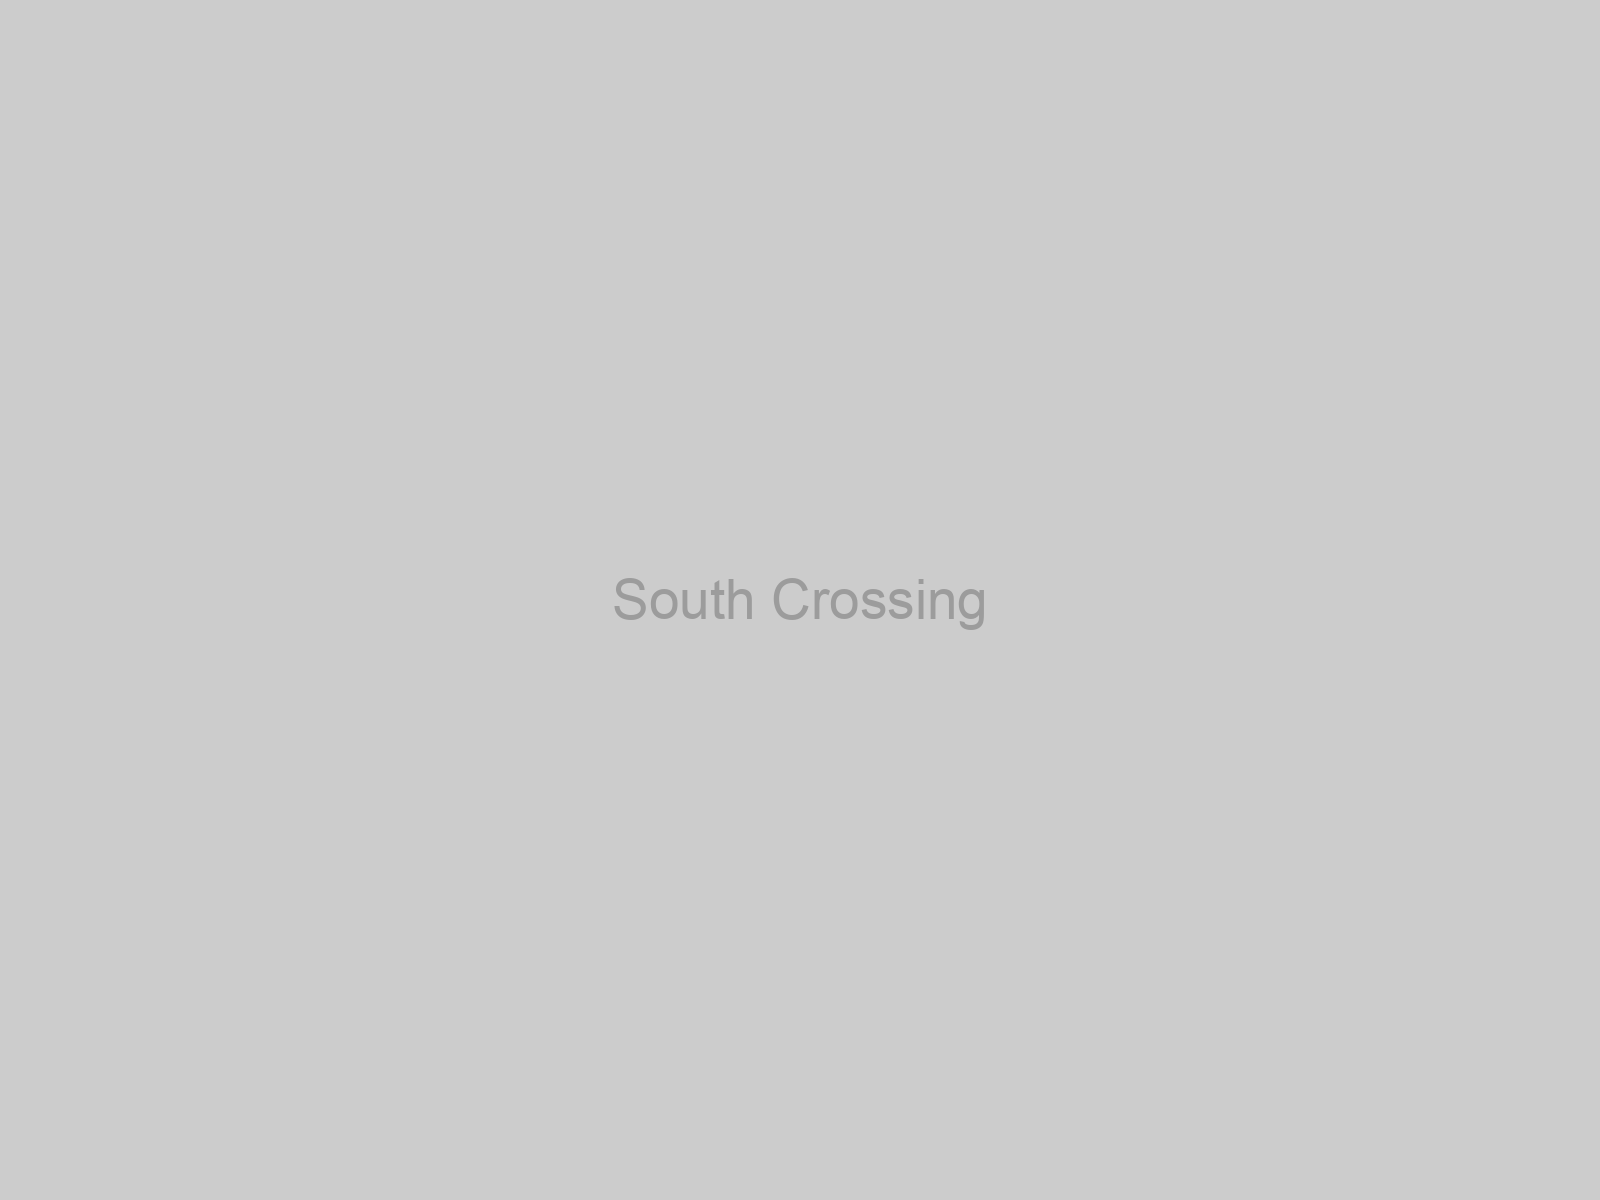 South Crossing